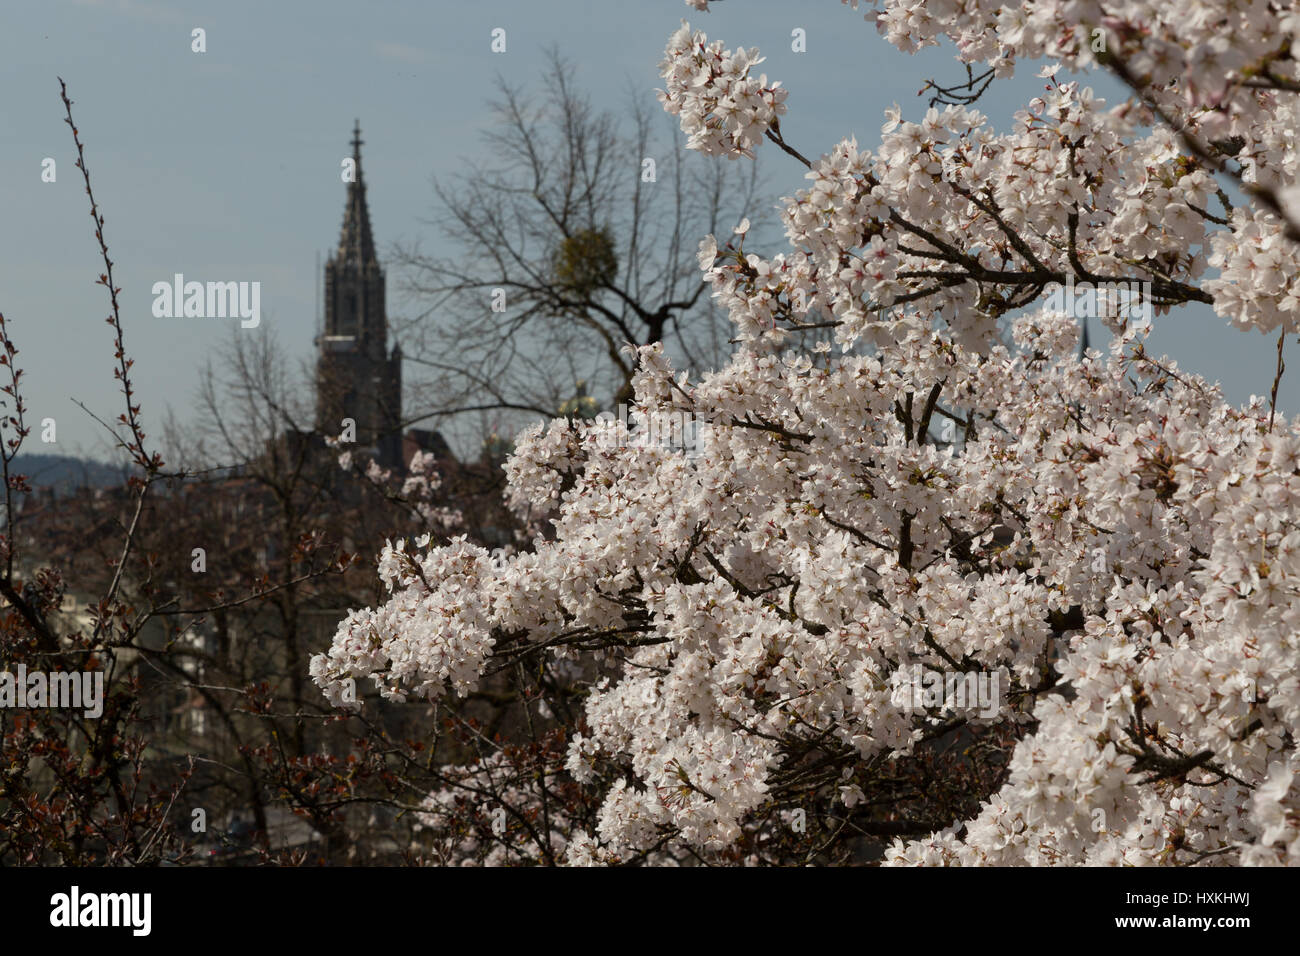 A photograph of some Japanese Cherry Blossoms in front of the old city in  Bern, Switzerland. They are located in the public rose garden (Rosengarten  Stock Photo - Alamy